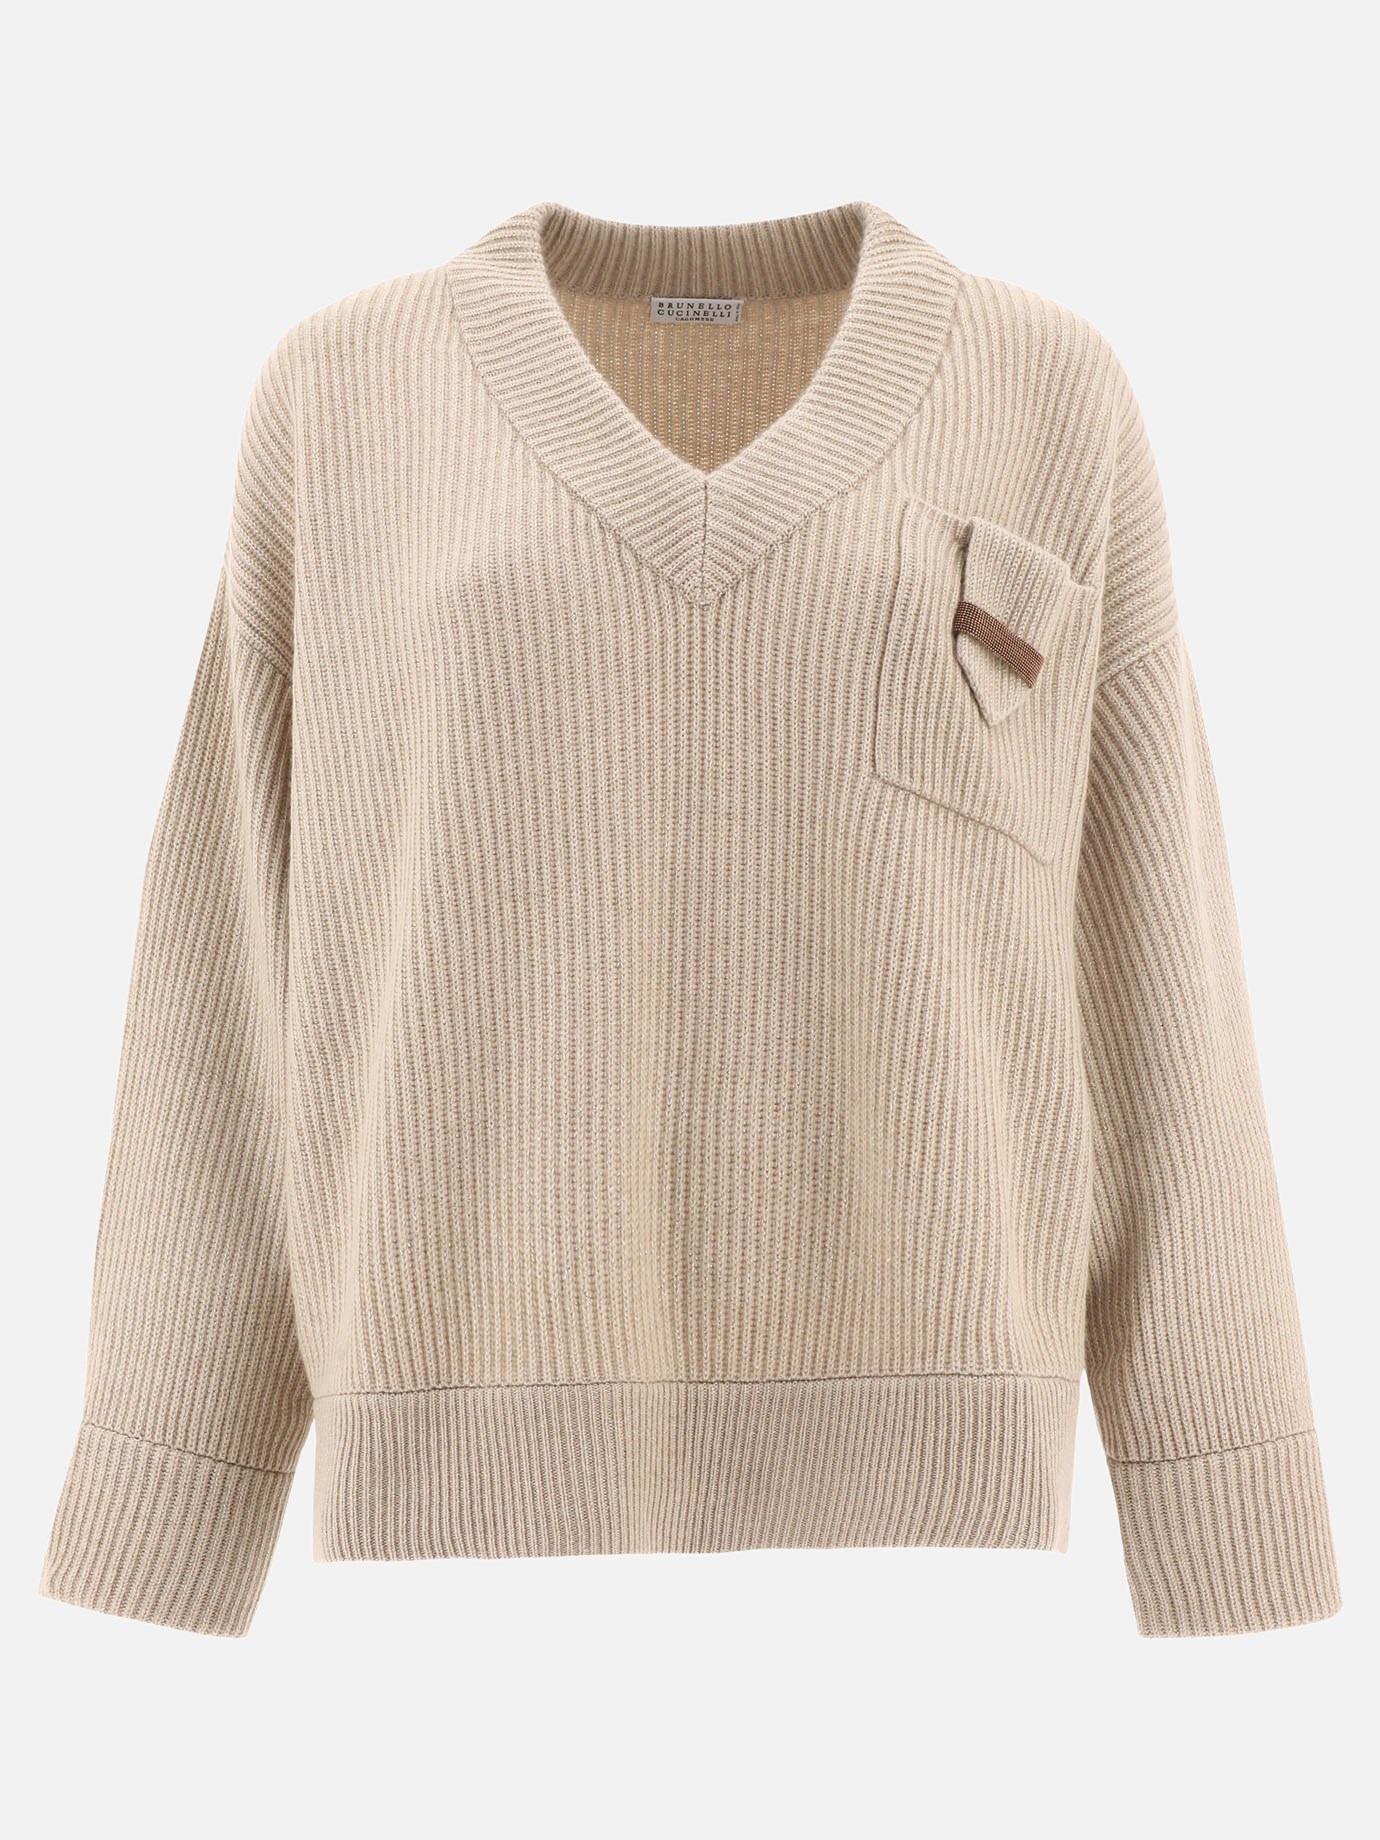 Ribbed sweater with pocketby Brunello Cucinelli - 5